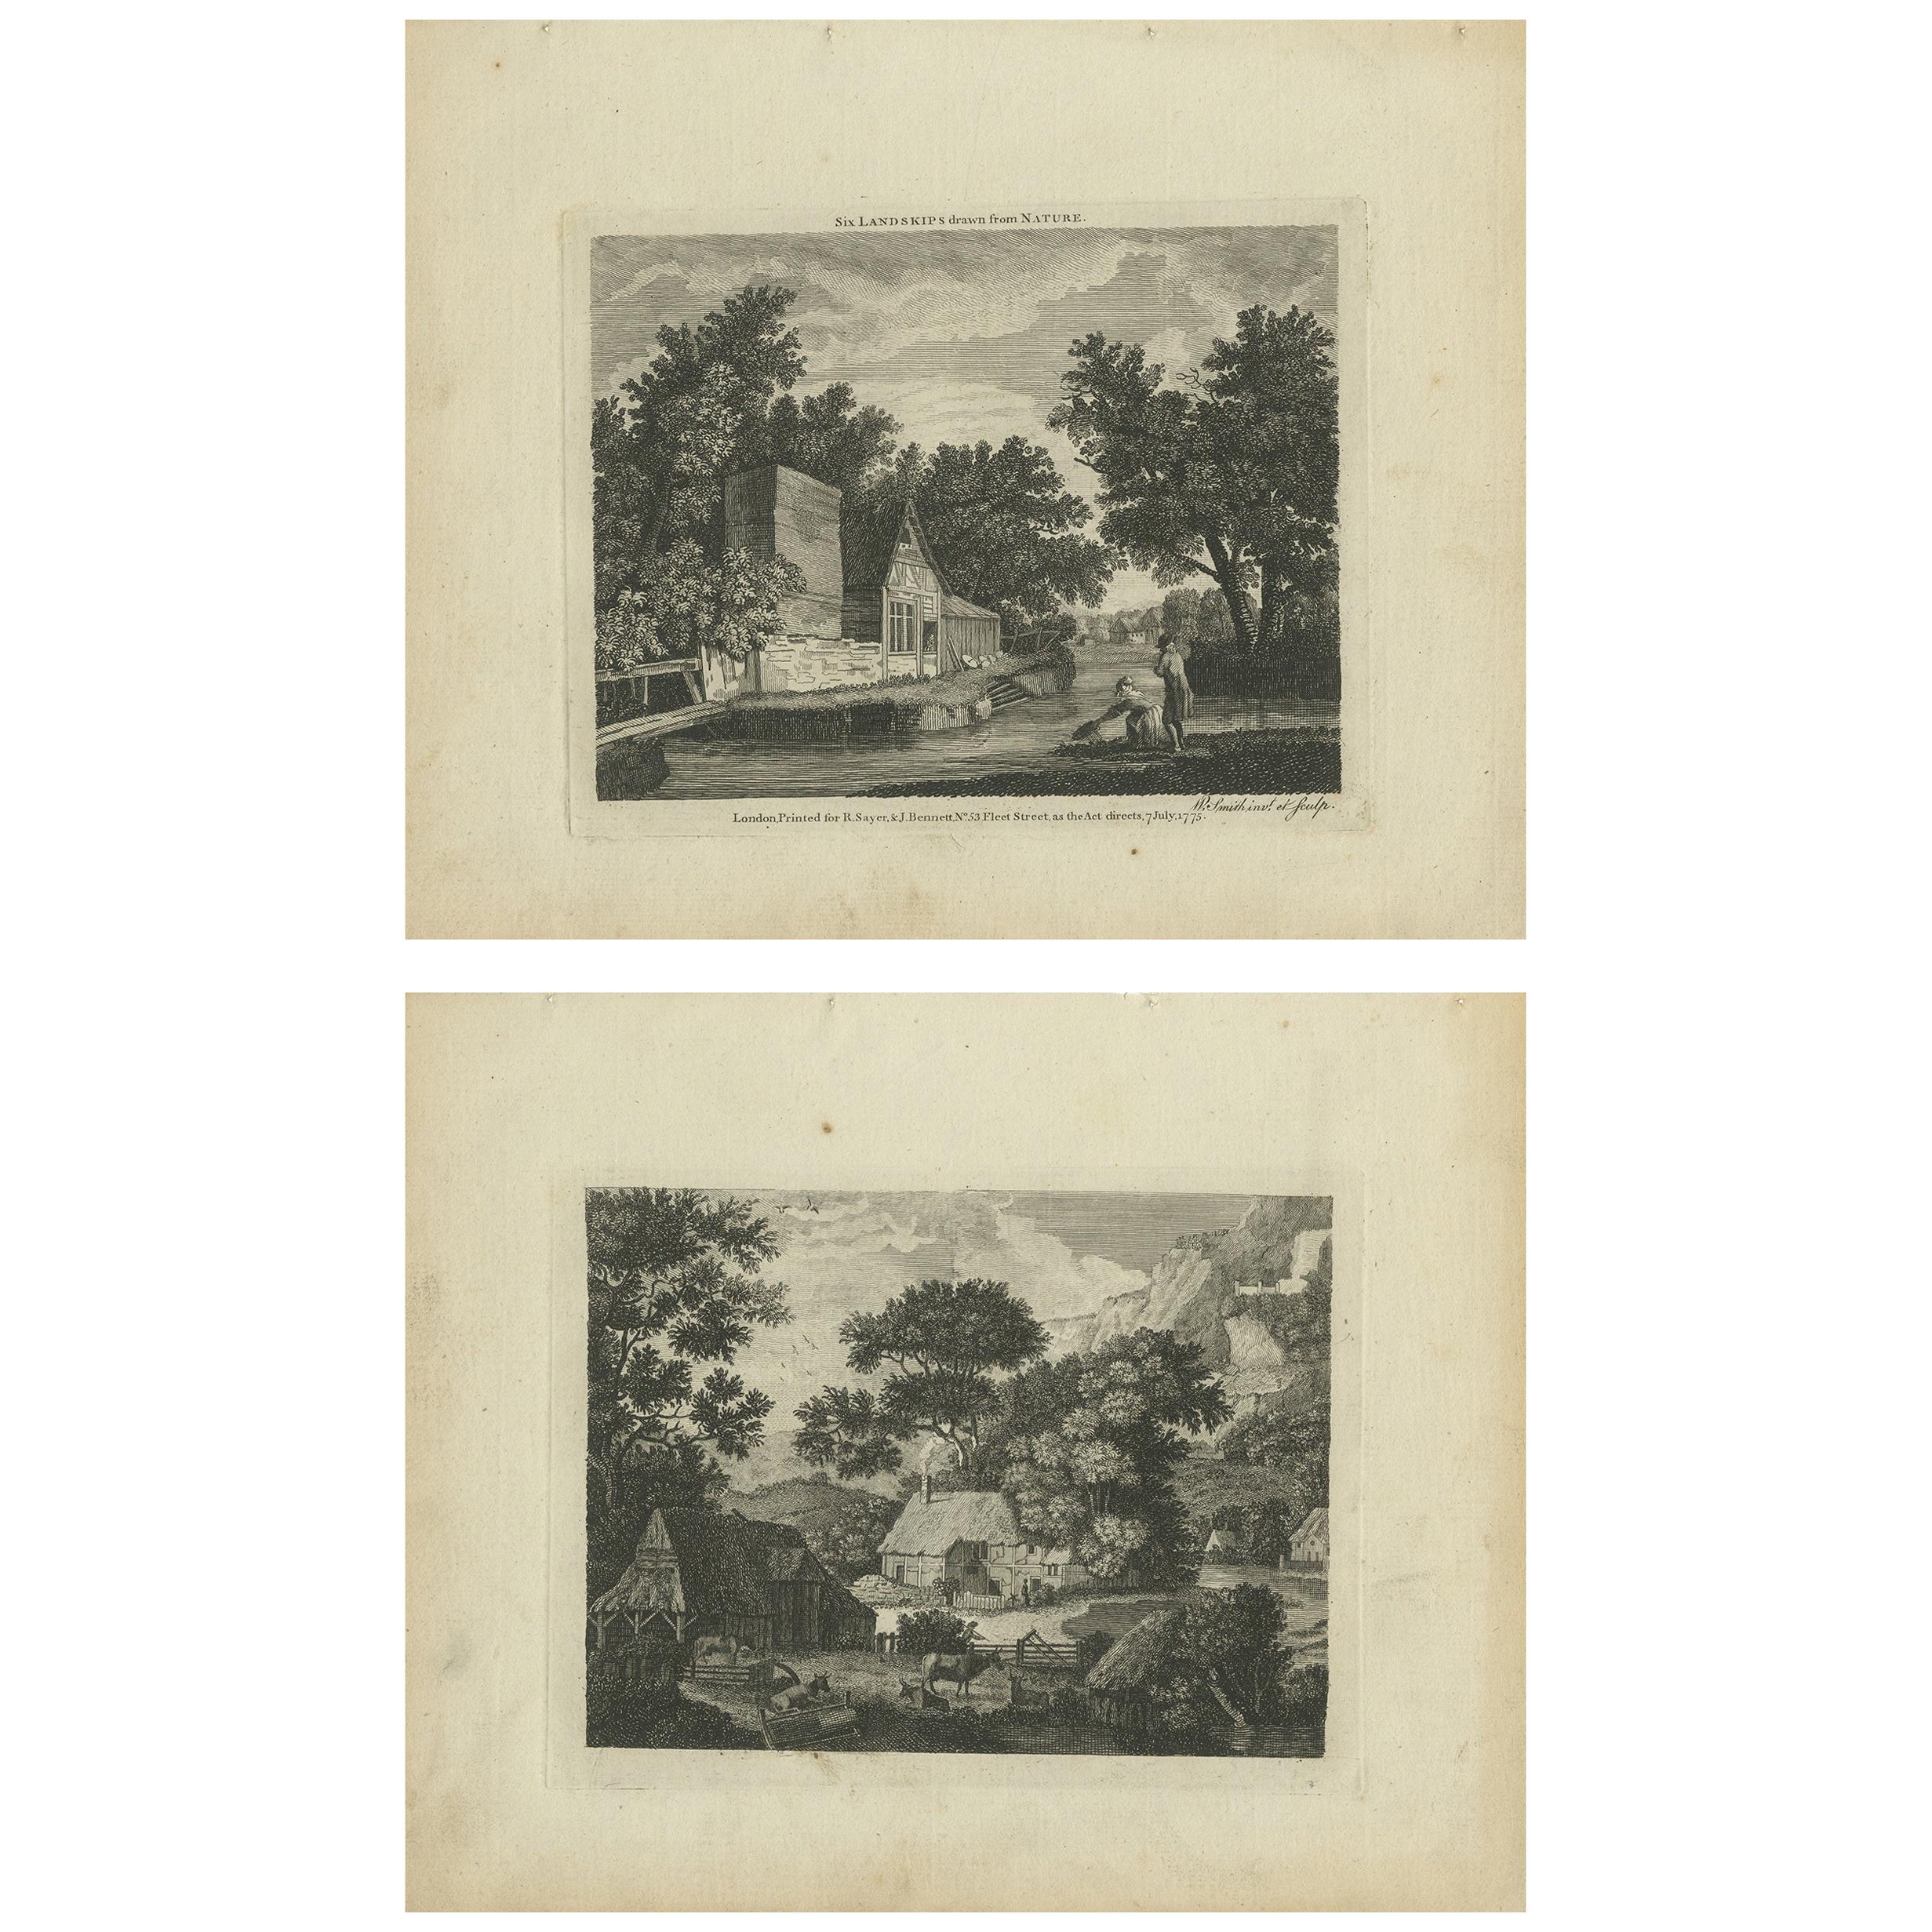 Set of 2 Antique Prints of Landscapes and Village Scenes by Sayer '1775'